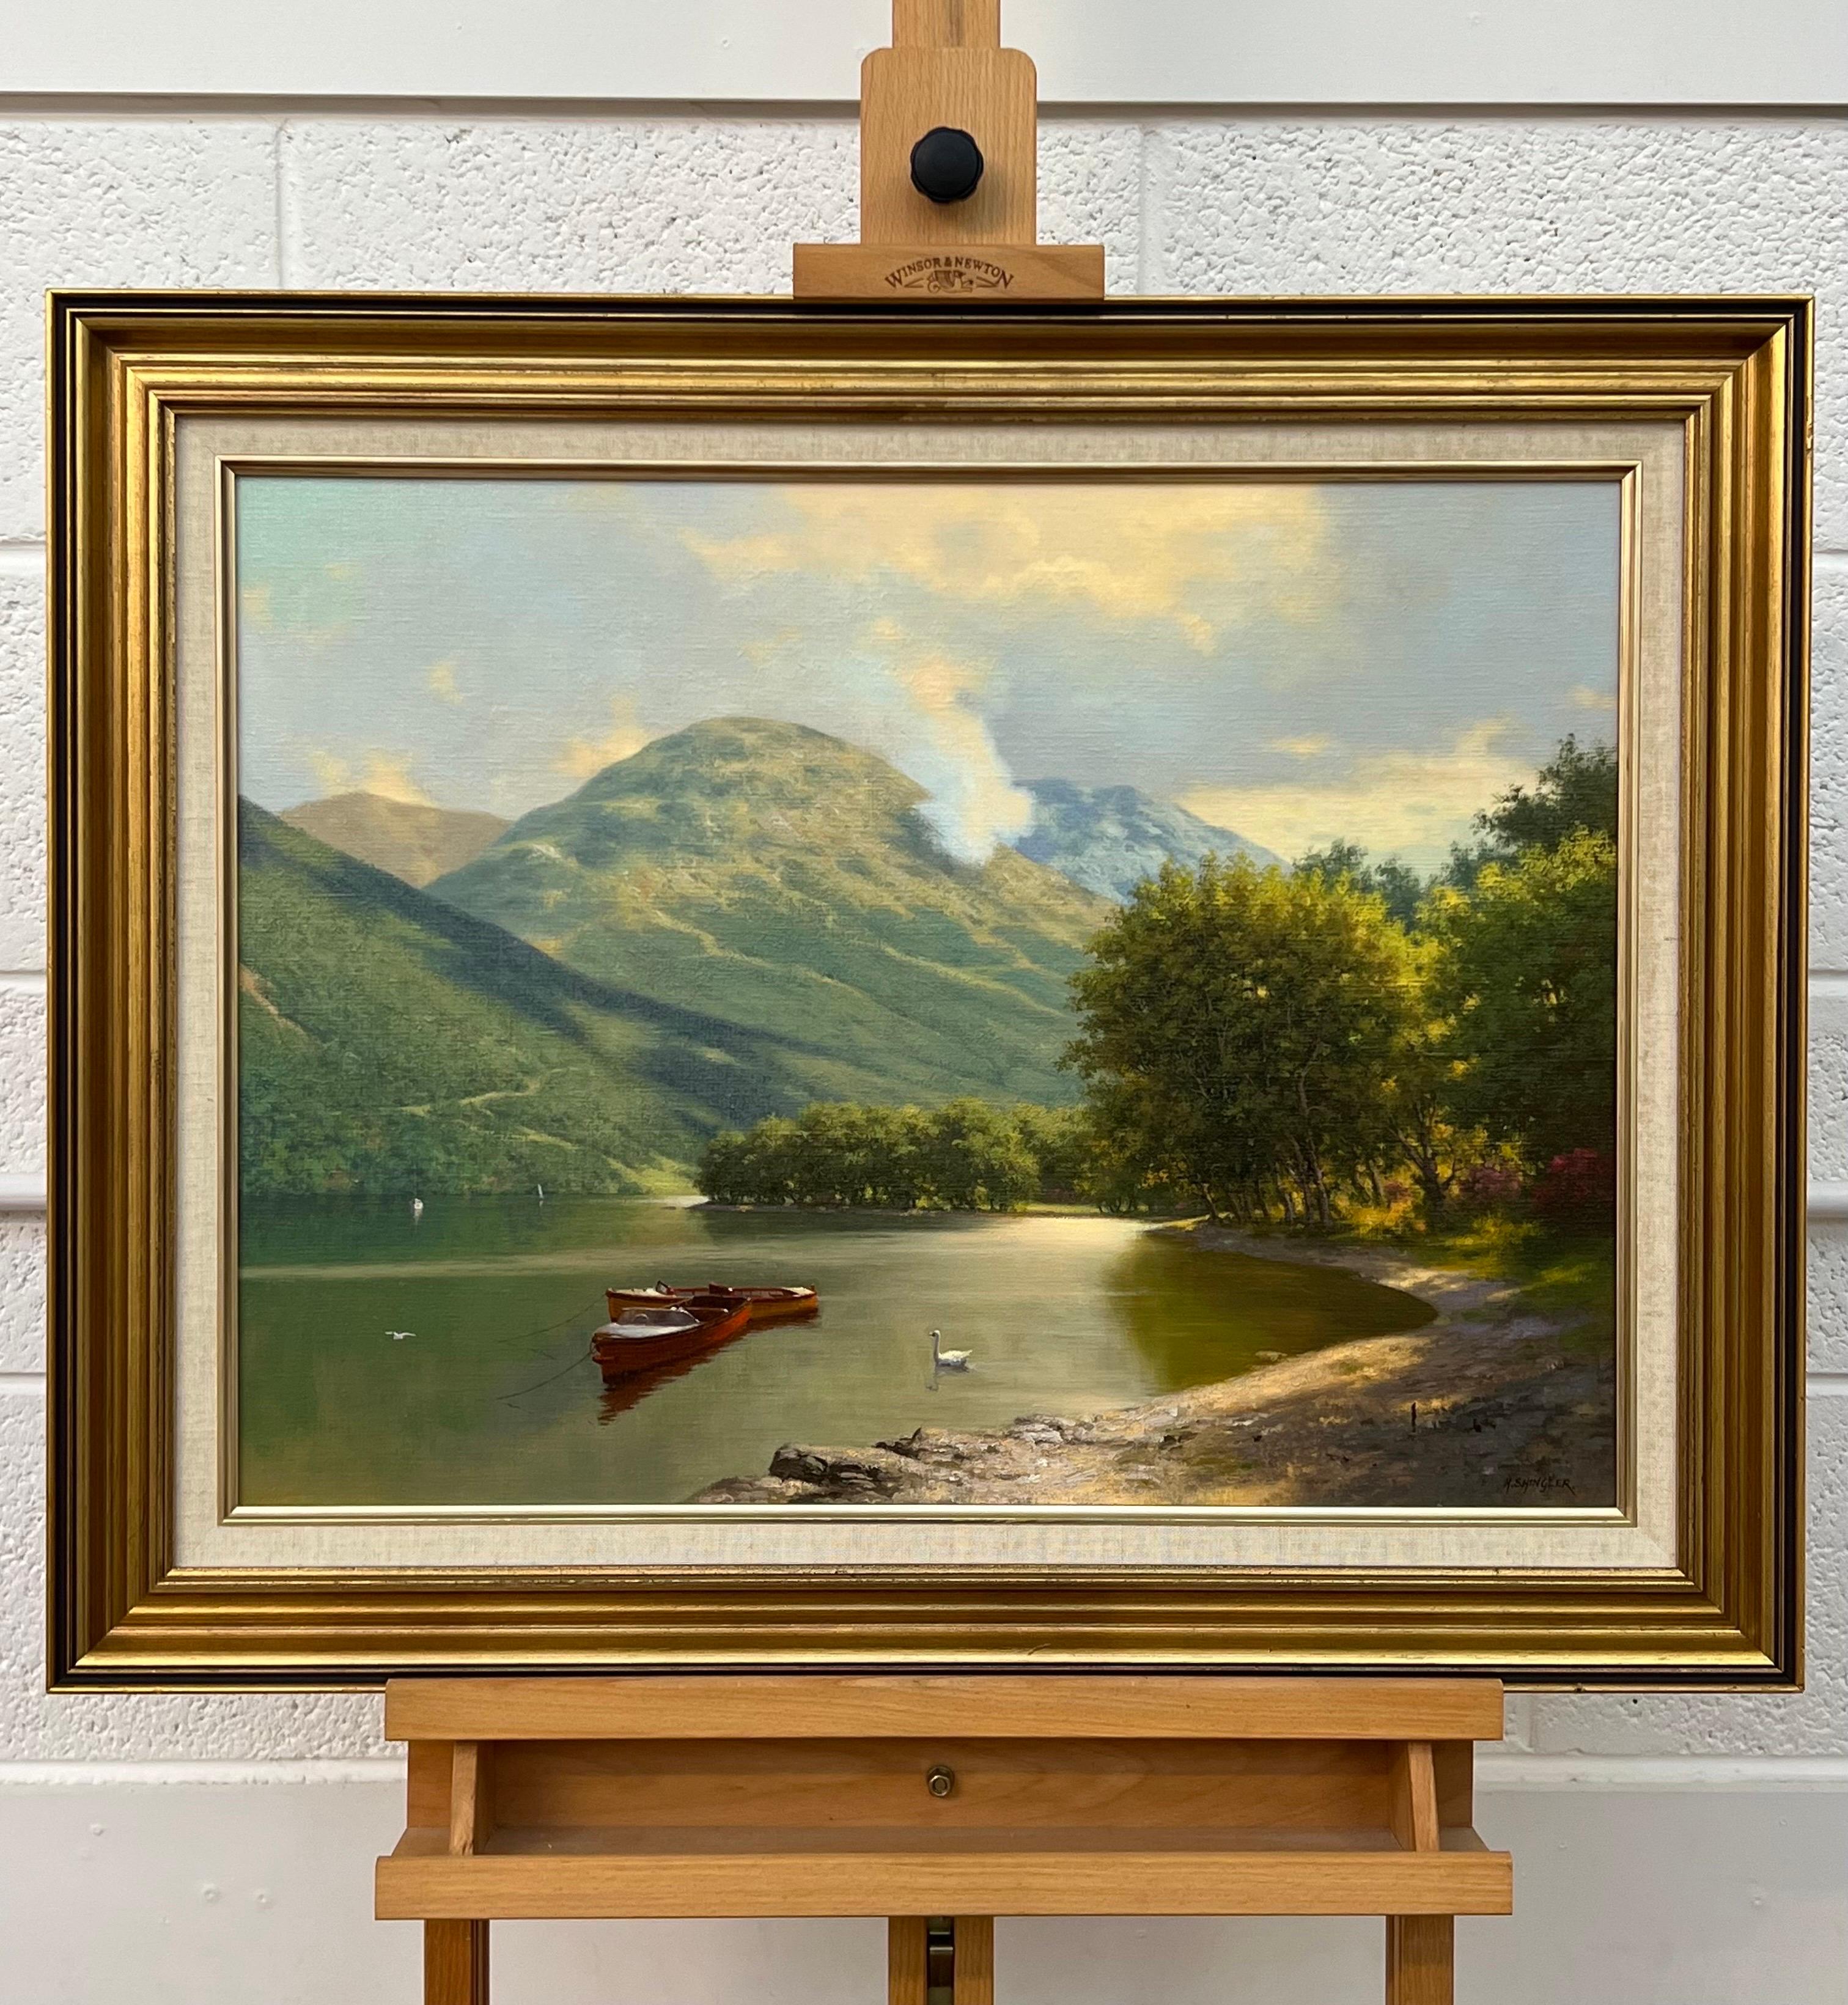 Tranquil Lake Scene with Boats & Swan in the Mountains of the Scottish Highlands by 20th Century British Landscape Artist, Howard Shingler. 

Art measures 24 x 18 inches 
Frame measures 30 x 24 inches

Born in Leicester in 1953, Howard Shingler is a